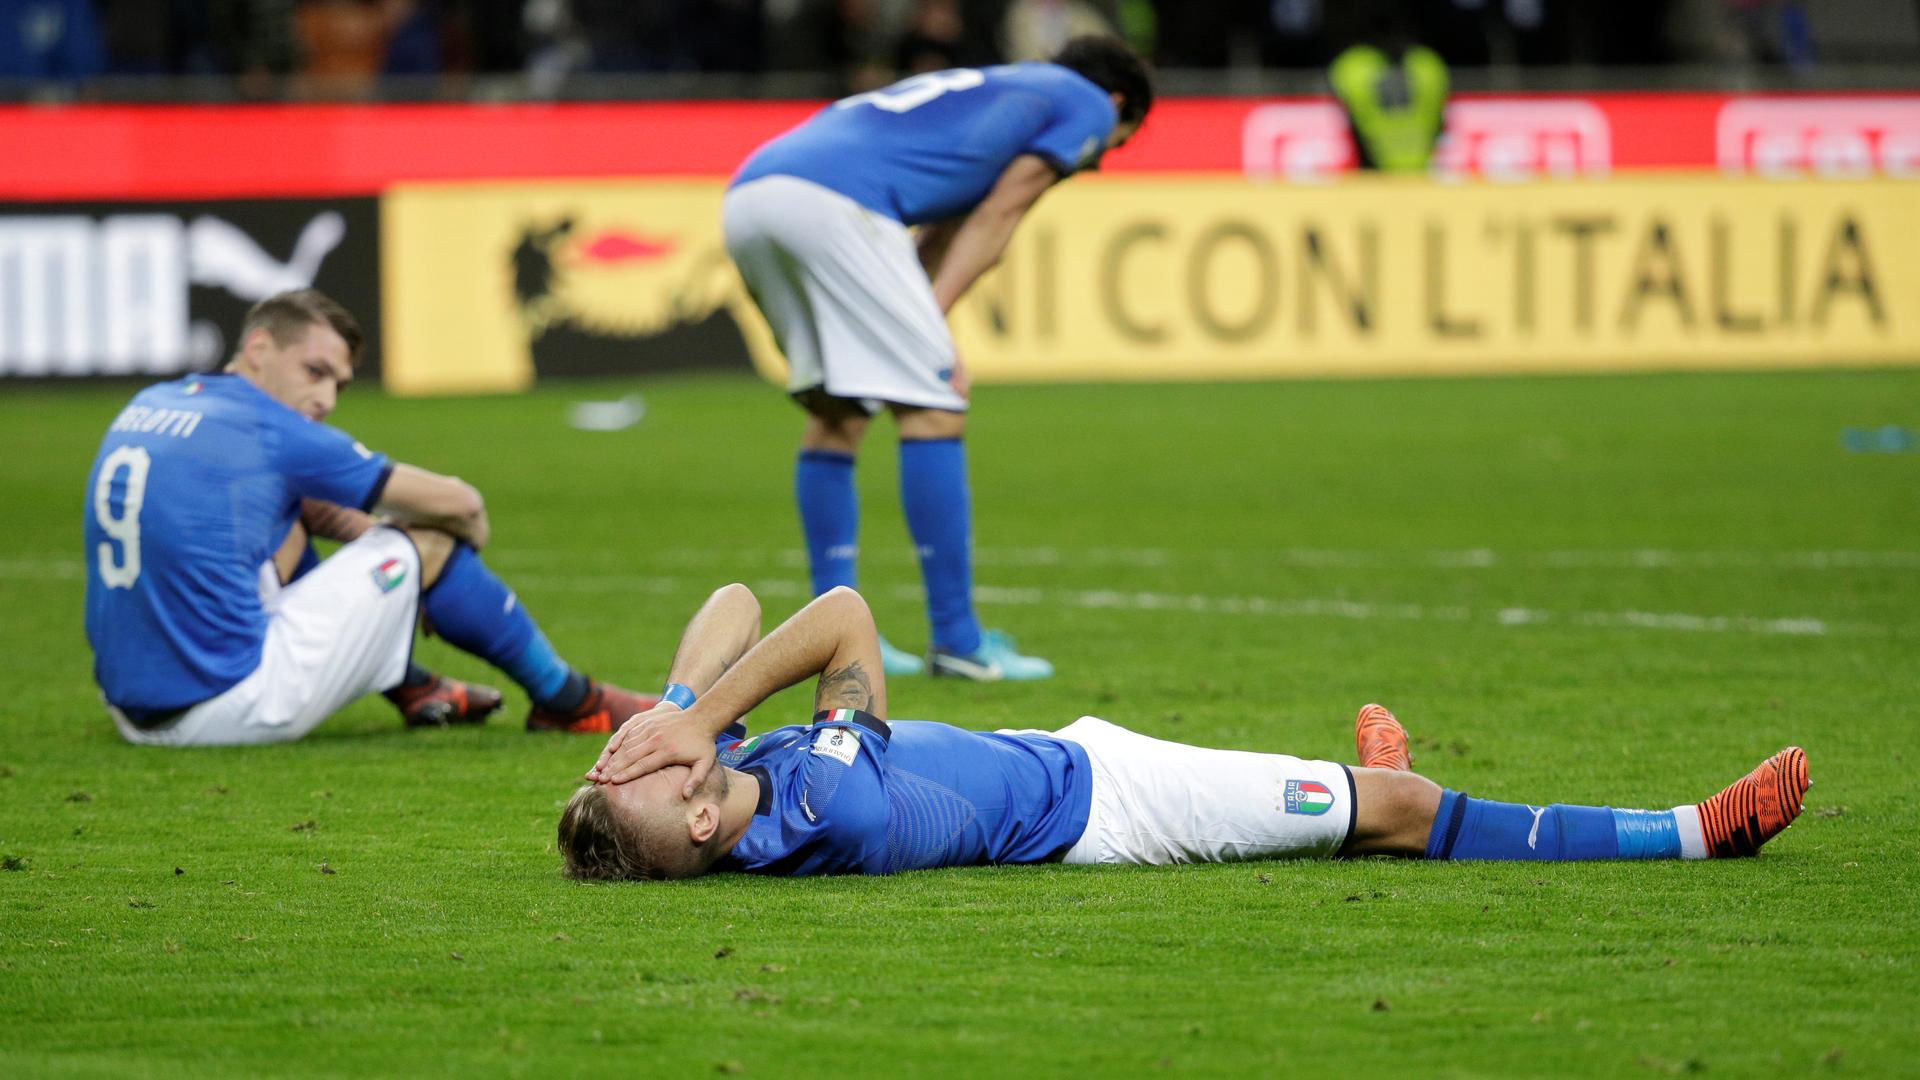 Italy players look dejected after their game with Sweden in a qualifying match for the 2018 FIFA World Cup in Russia